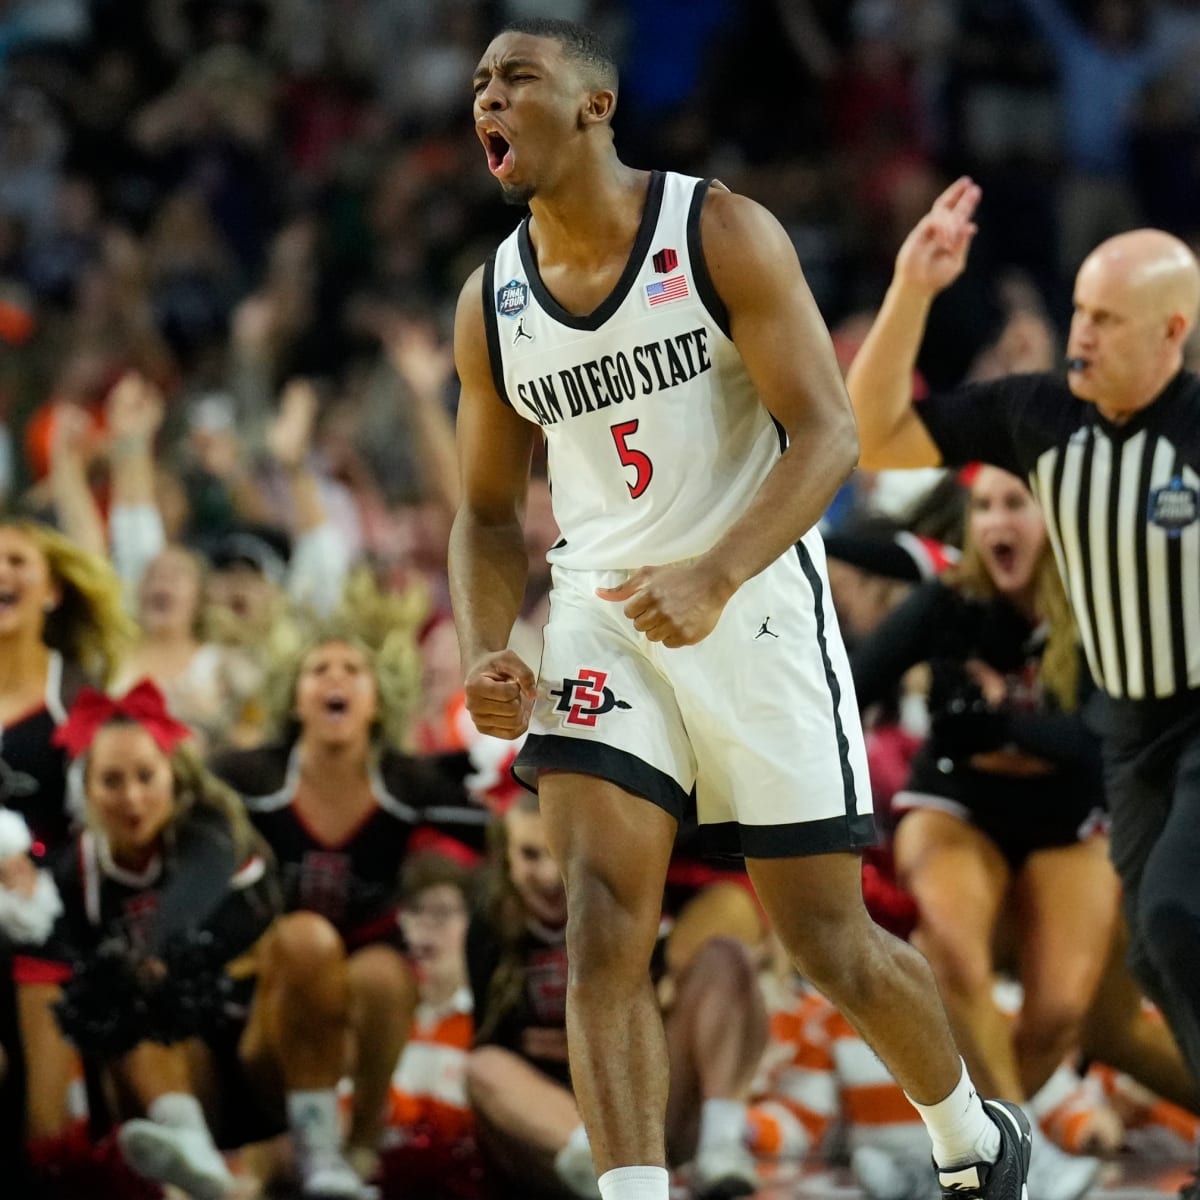 Butler's buzzer-beater sends San Diego State to title game